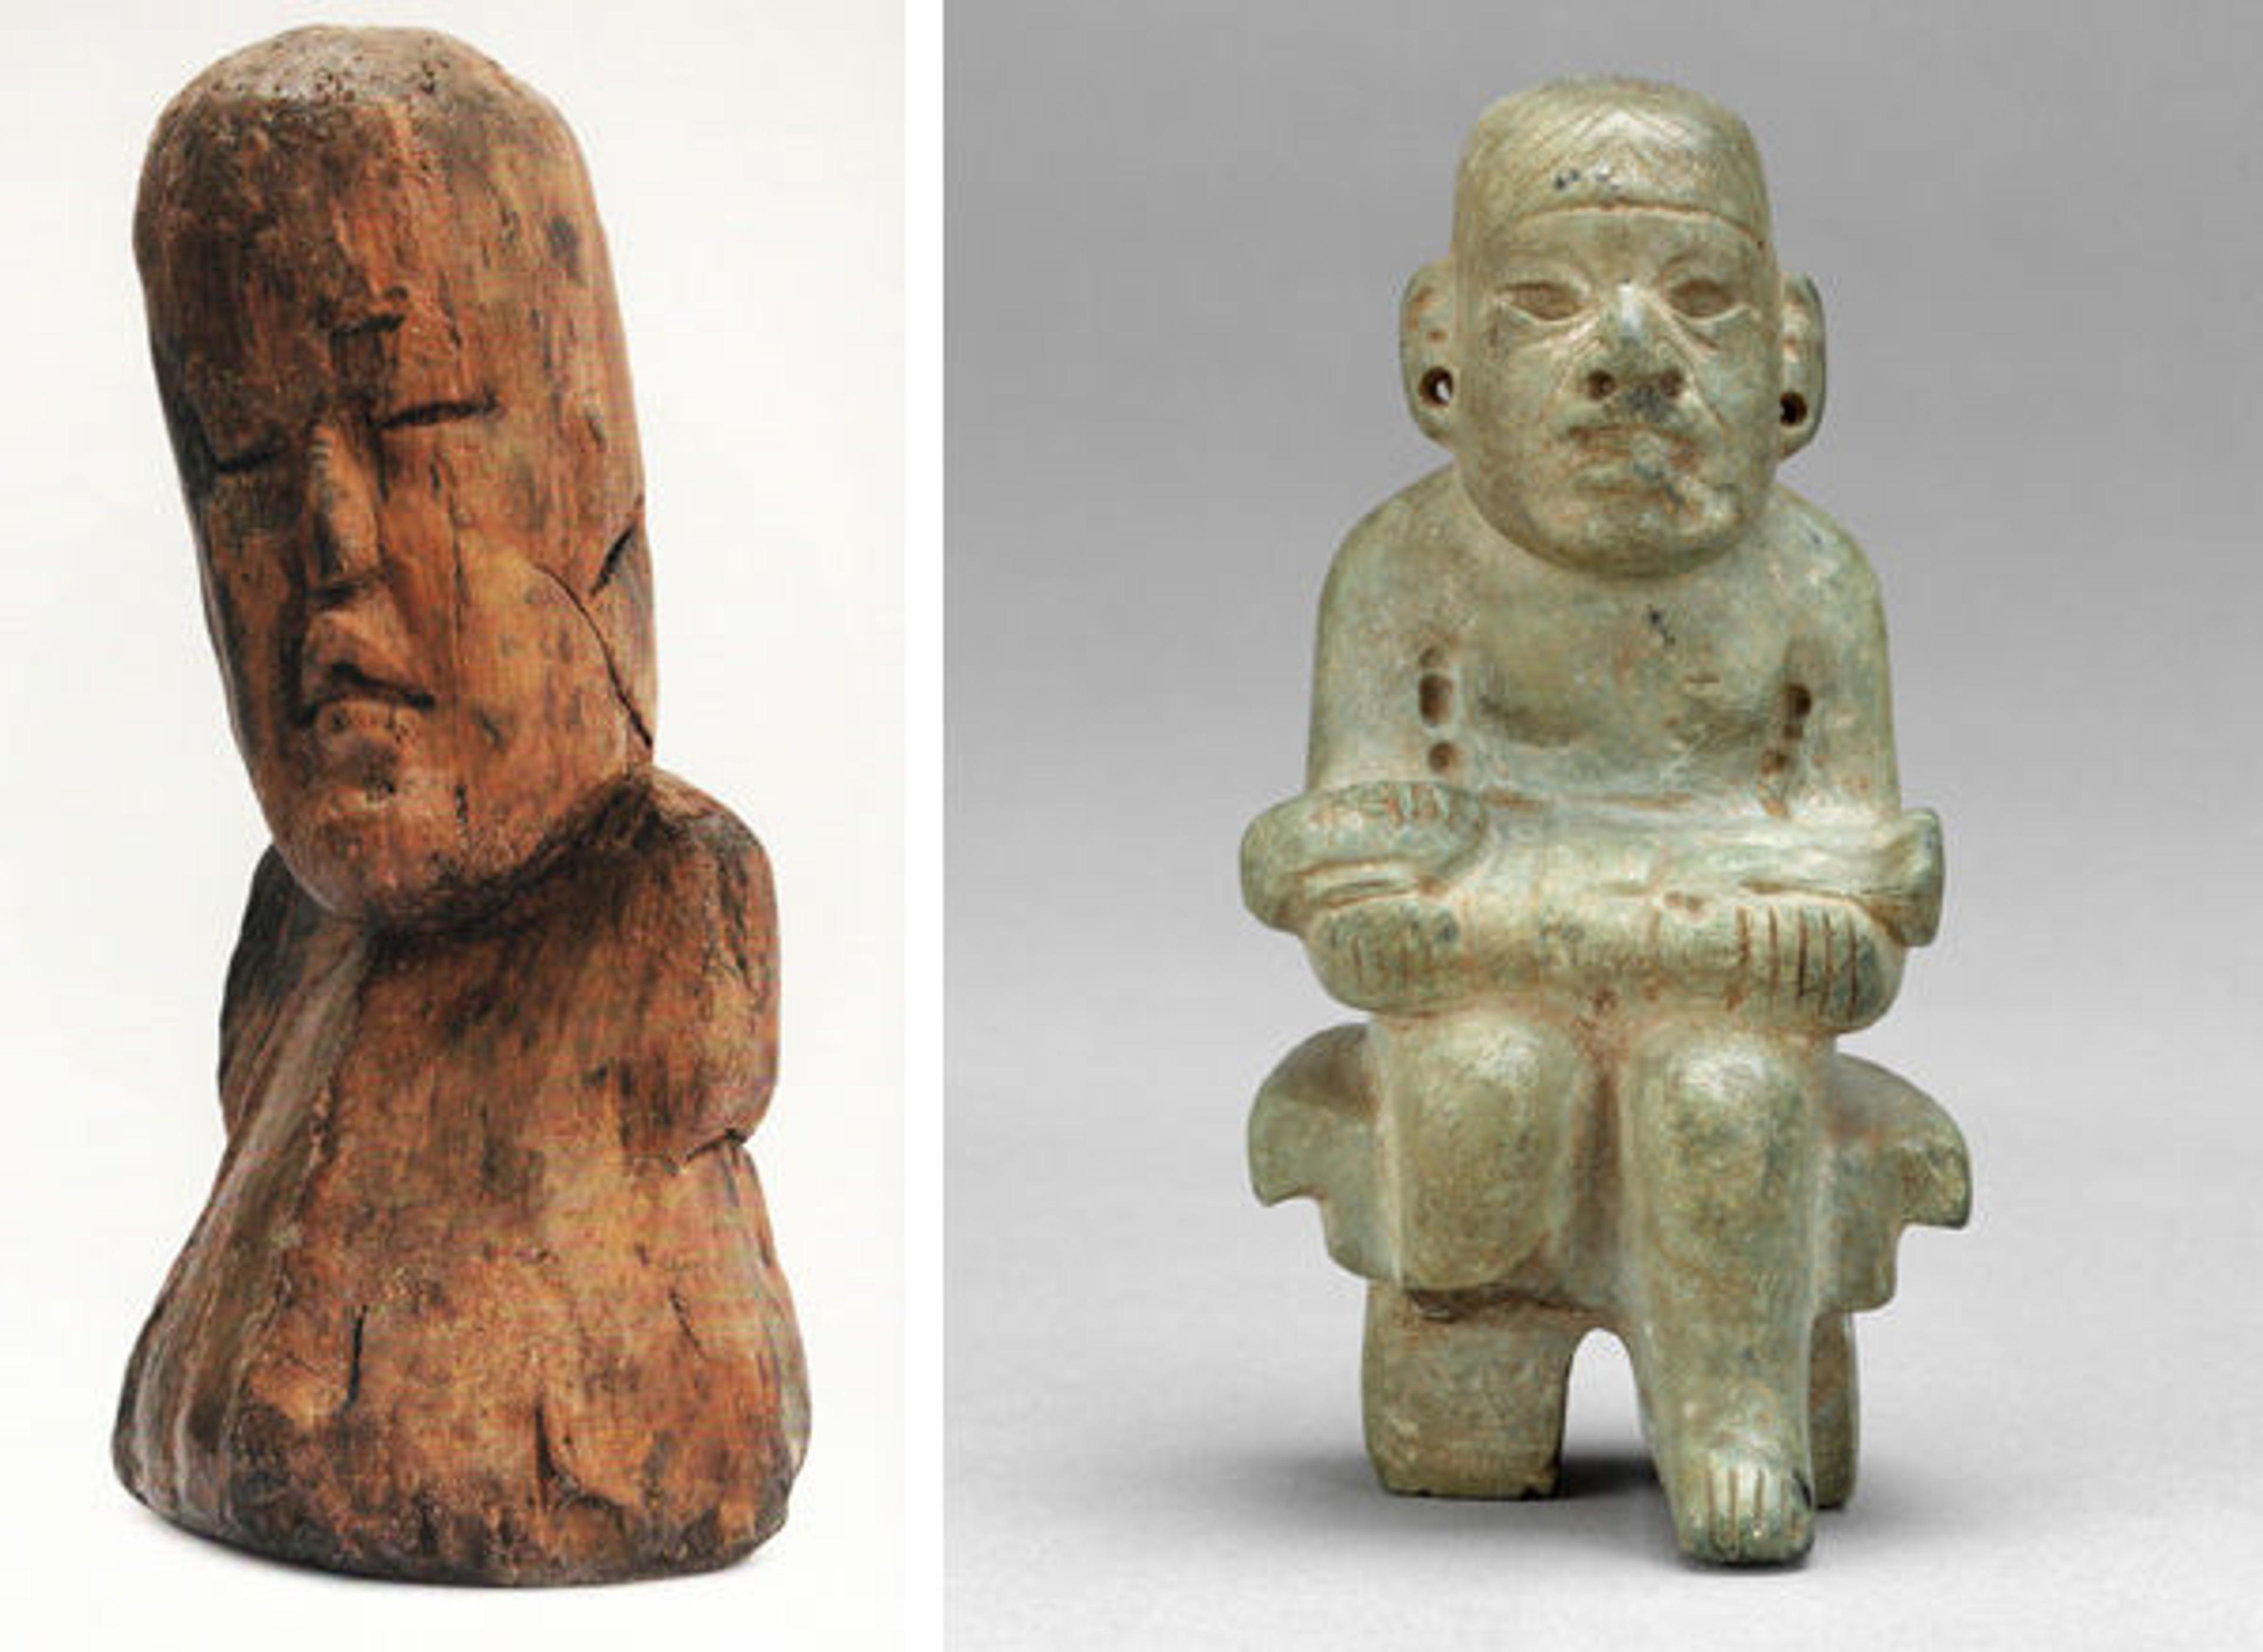 Left: Fig. 3. Wooden bust from El Manatí. H. 20 x W. 7 x D. 8 in. (50.8 x 17.8 x 20.3cm). Centro INAH Veracruz. From Olmec Colossal Masterworks of Ancient Mexico, plate 34. Right: Fig. 4.  Seated bench figure, 10th–4th century B.C. Mexico, Mesoamerica. Olmec. Serpentine; H. 4 7/16 x W. 2 1/4 x D. 2 1/8in. (11.3 x 5.7 x 5.4cm). The Metropolitan Museum of Art, New York, The Michael C. Rockefeller Memorial Collection, Bequest of Nelson A. Rockefeller, 1979 (1979.206.940)